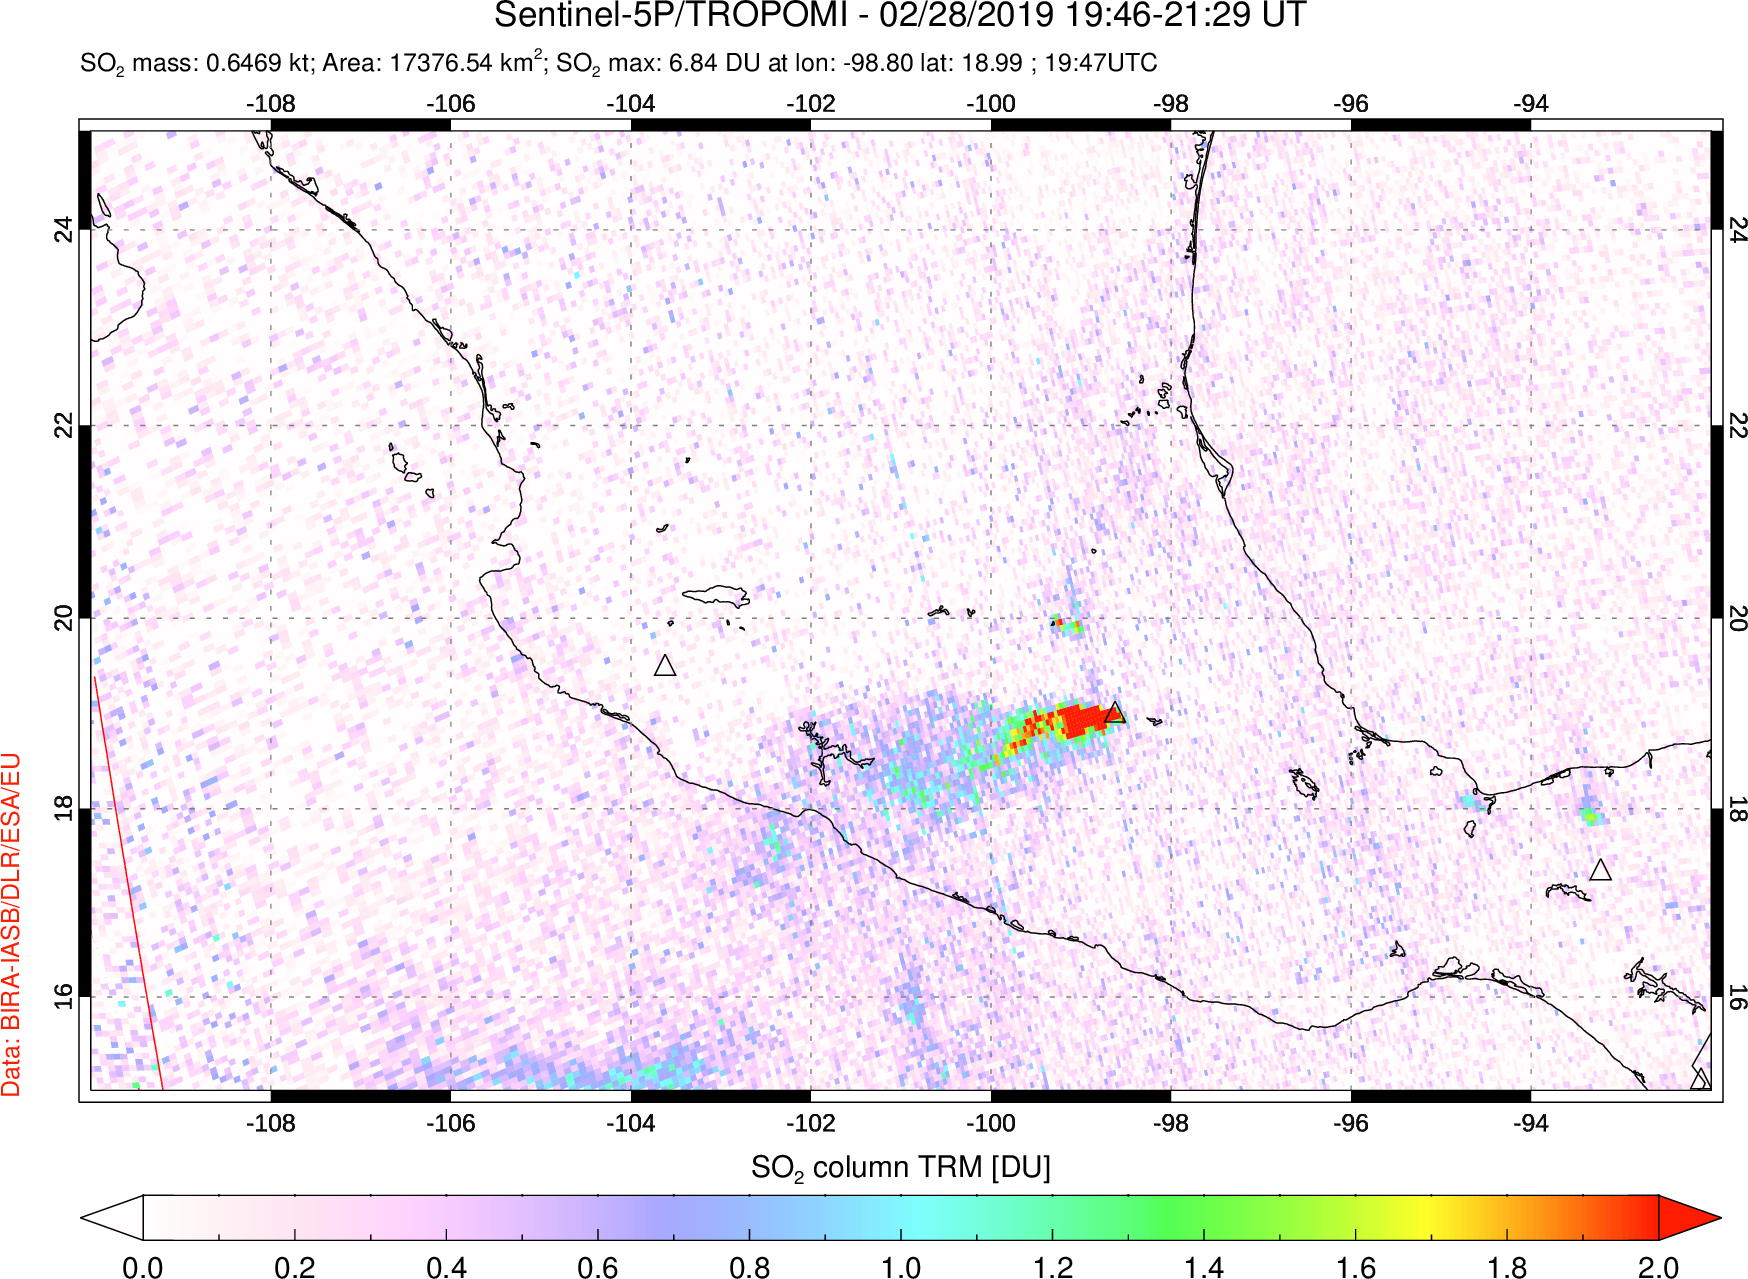 A sulfur dioxide image over Mexico on Feb 28, 2019.